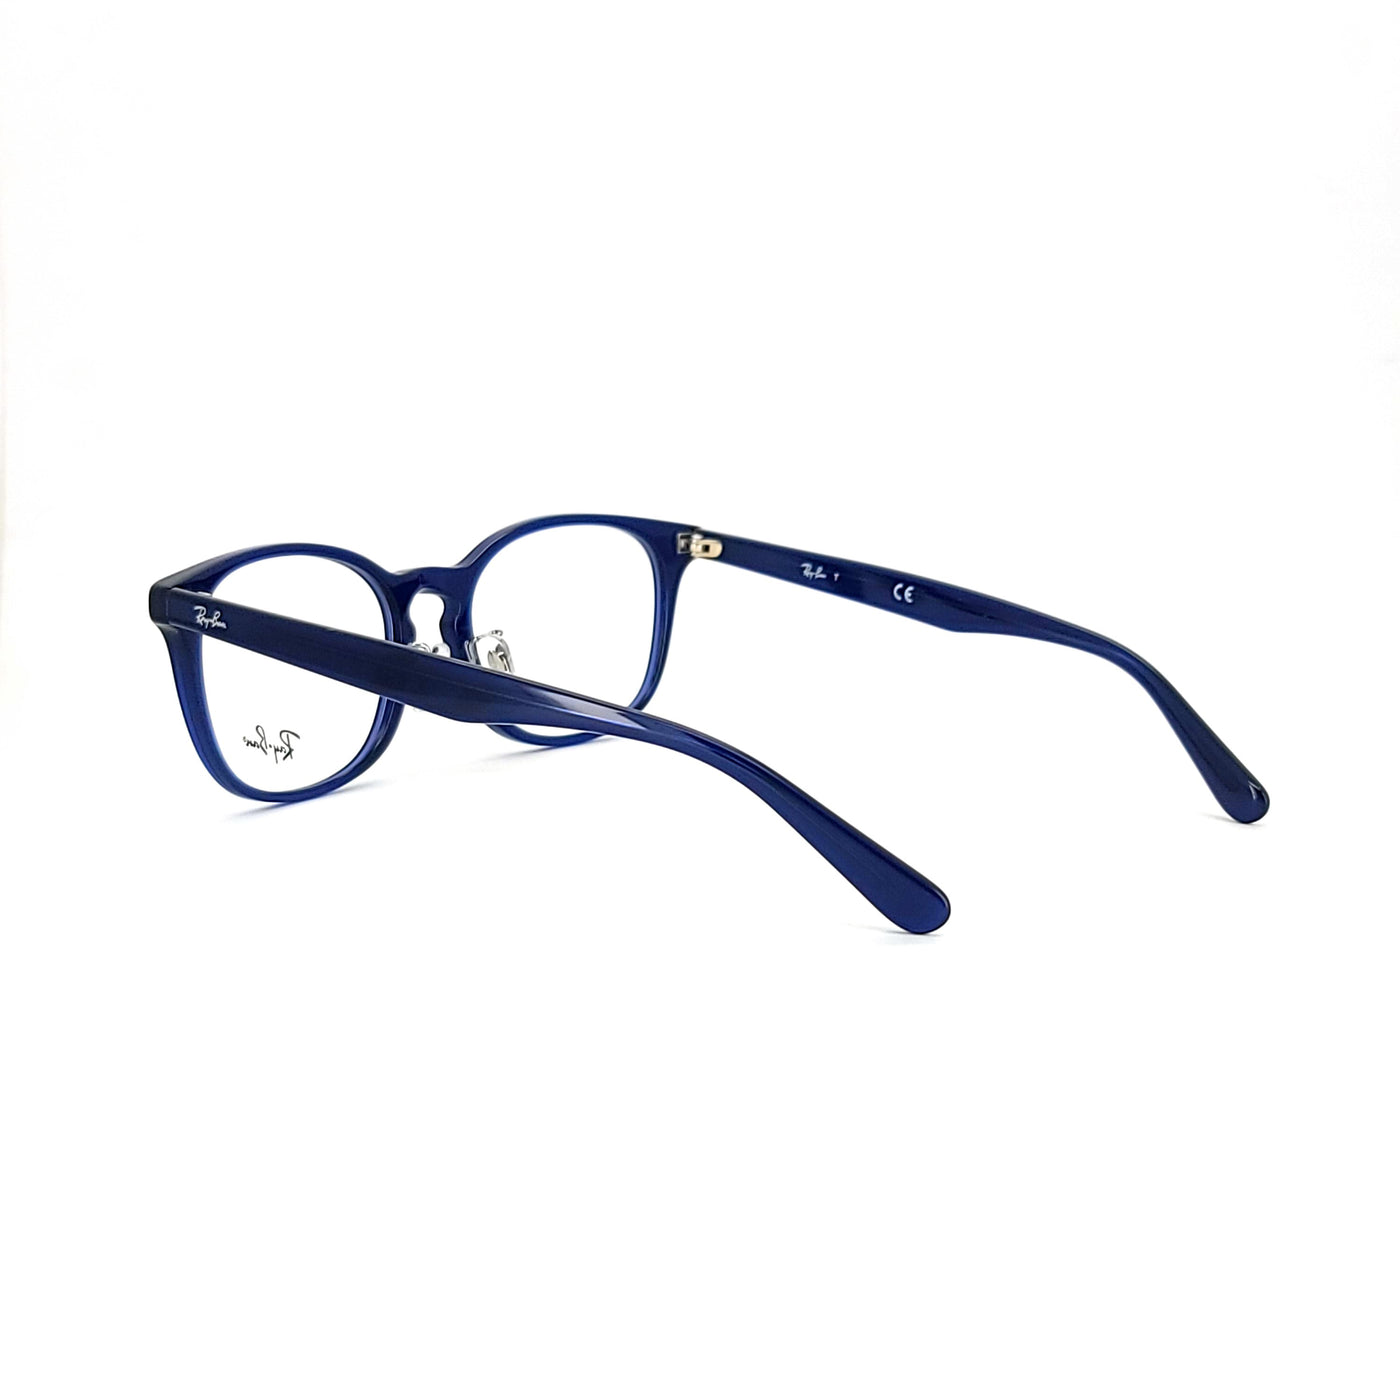 Ray-Ban RB5386D/5986_53 | Eyeglasses - Vision Express Optical Philippines